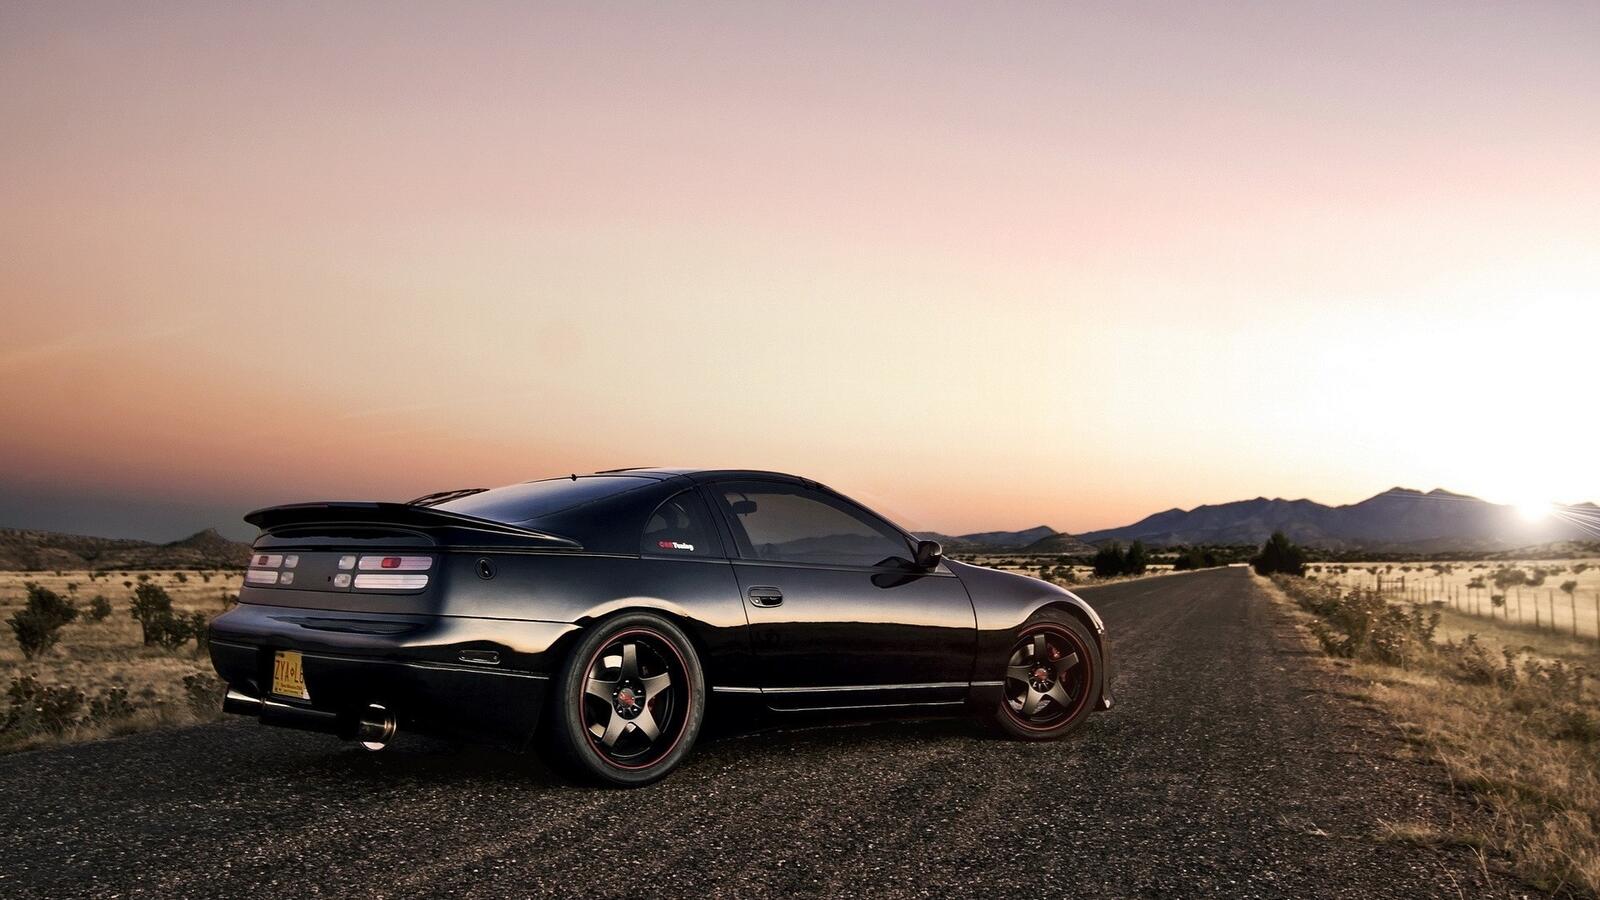 Free photo A black Nissan 300zx on a desert road